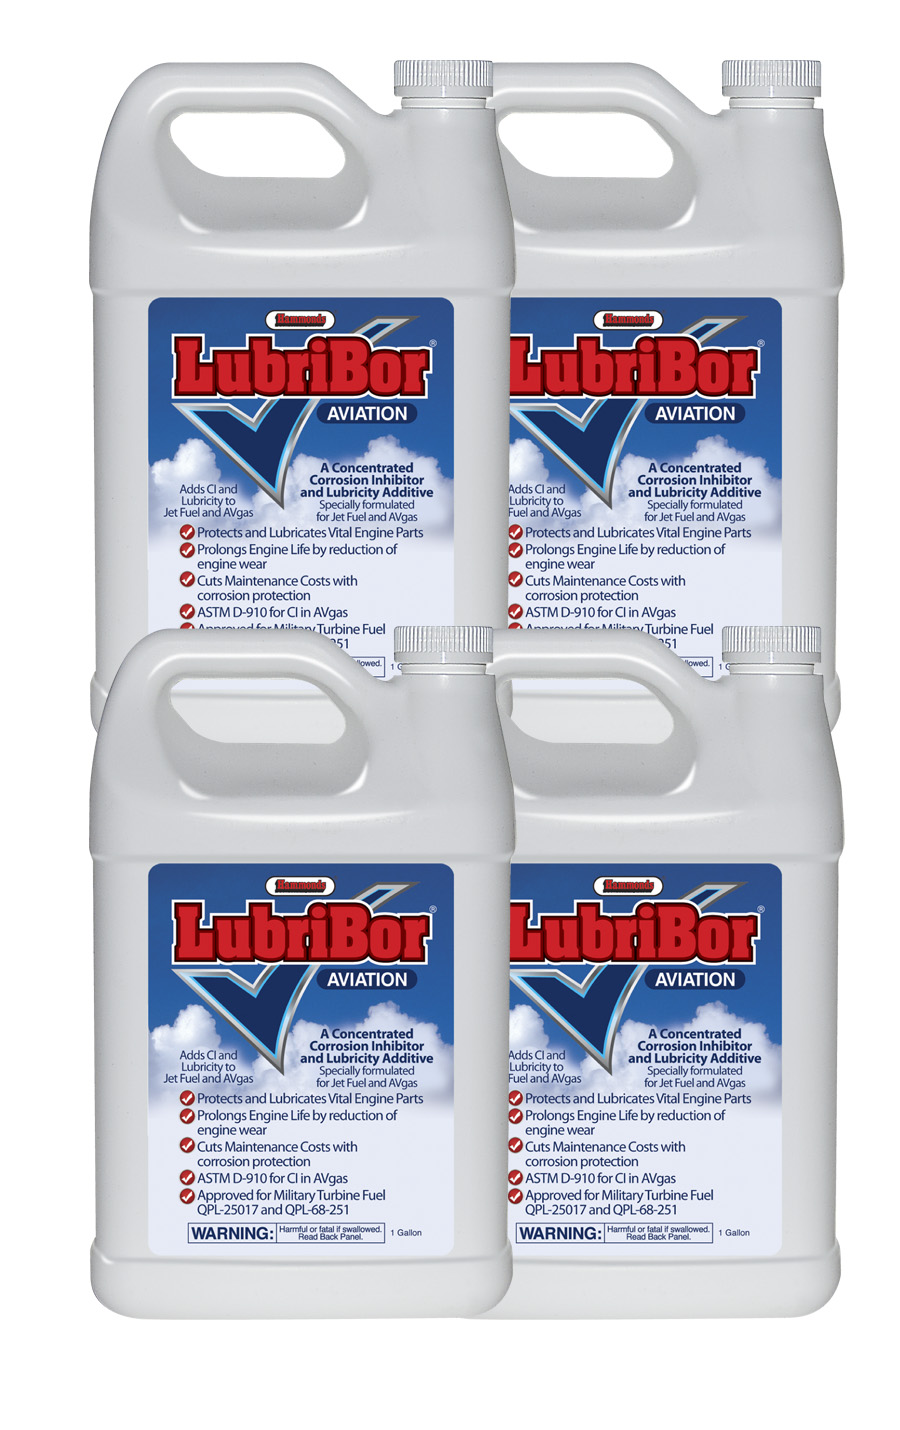 LubriBor 1 gal. (4 Pack) - Corrosion Inhibitor and Lubricity Improver for Aviation Image